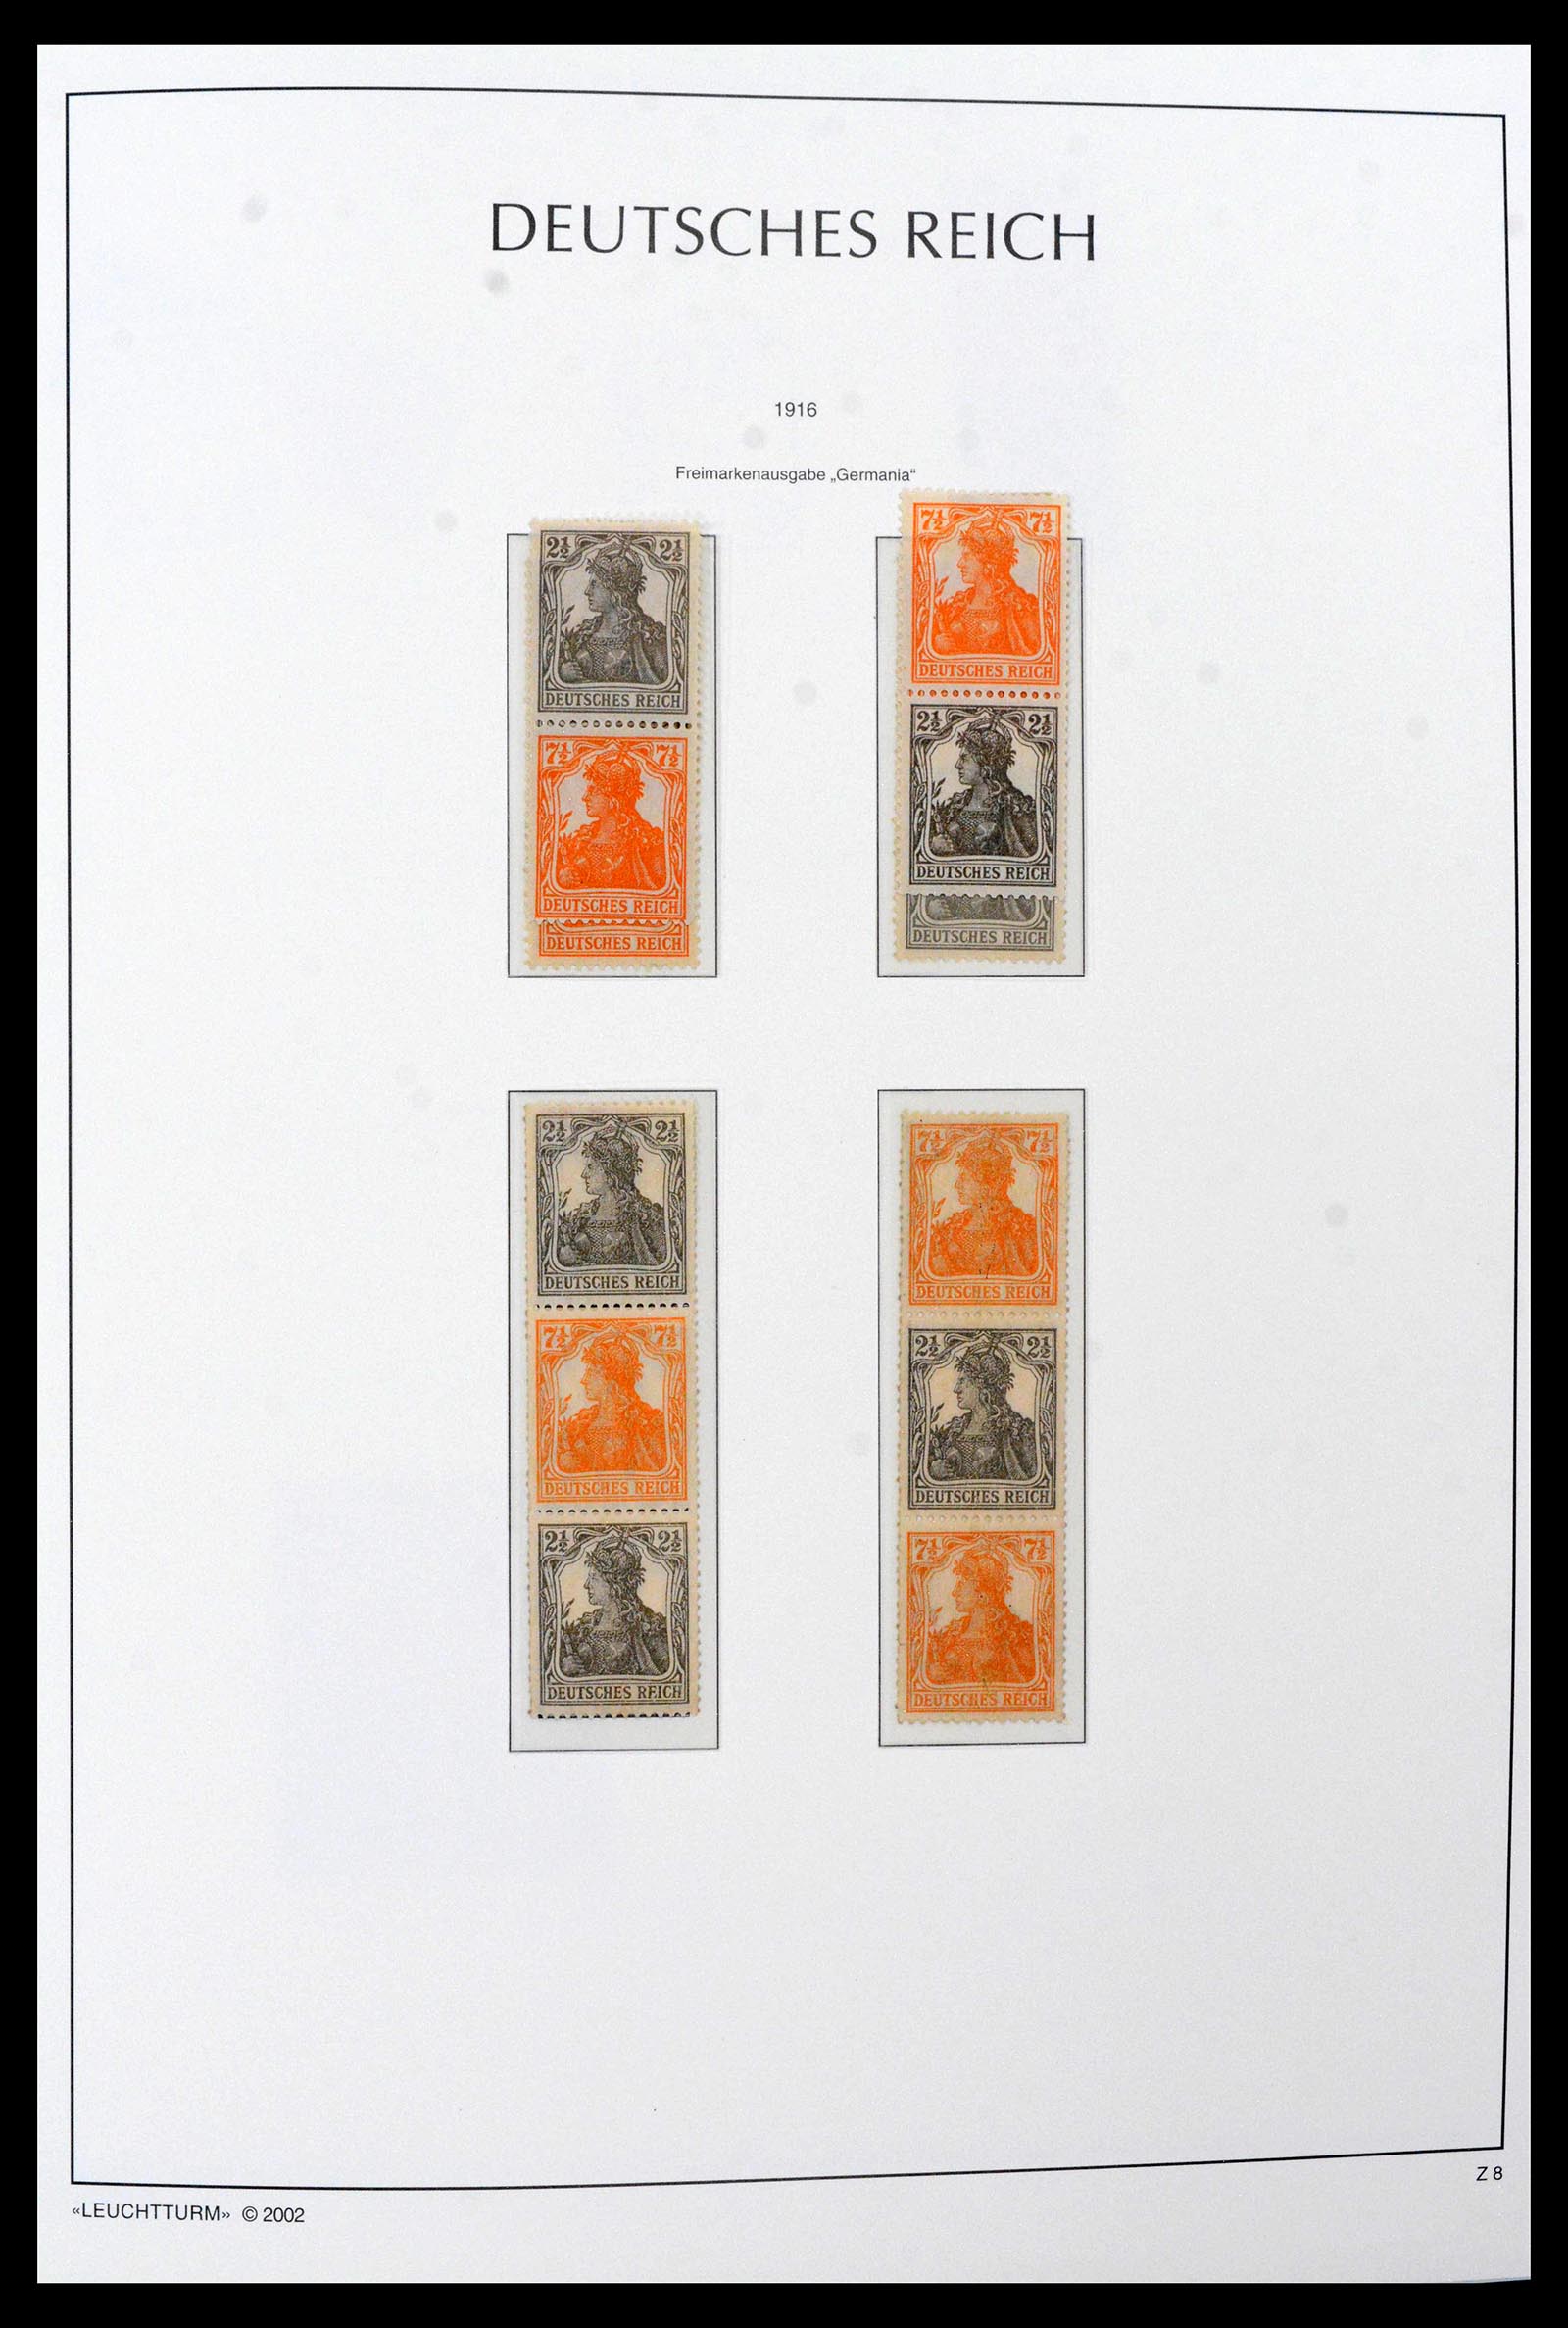 39045 0003 - Stamp collection 39045 German Reich combinations 1913-1941.